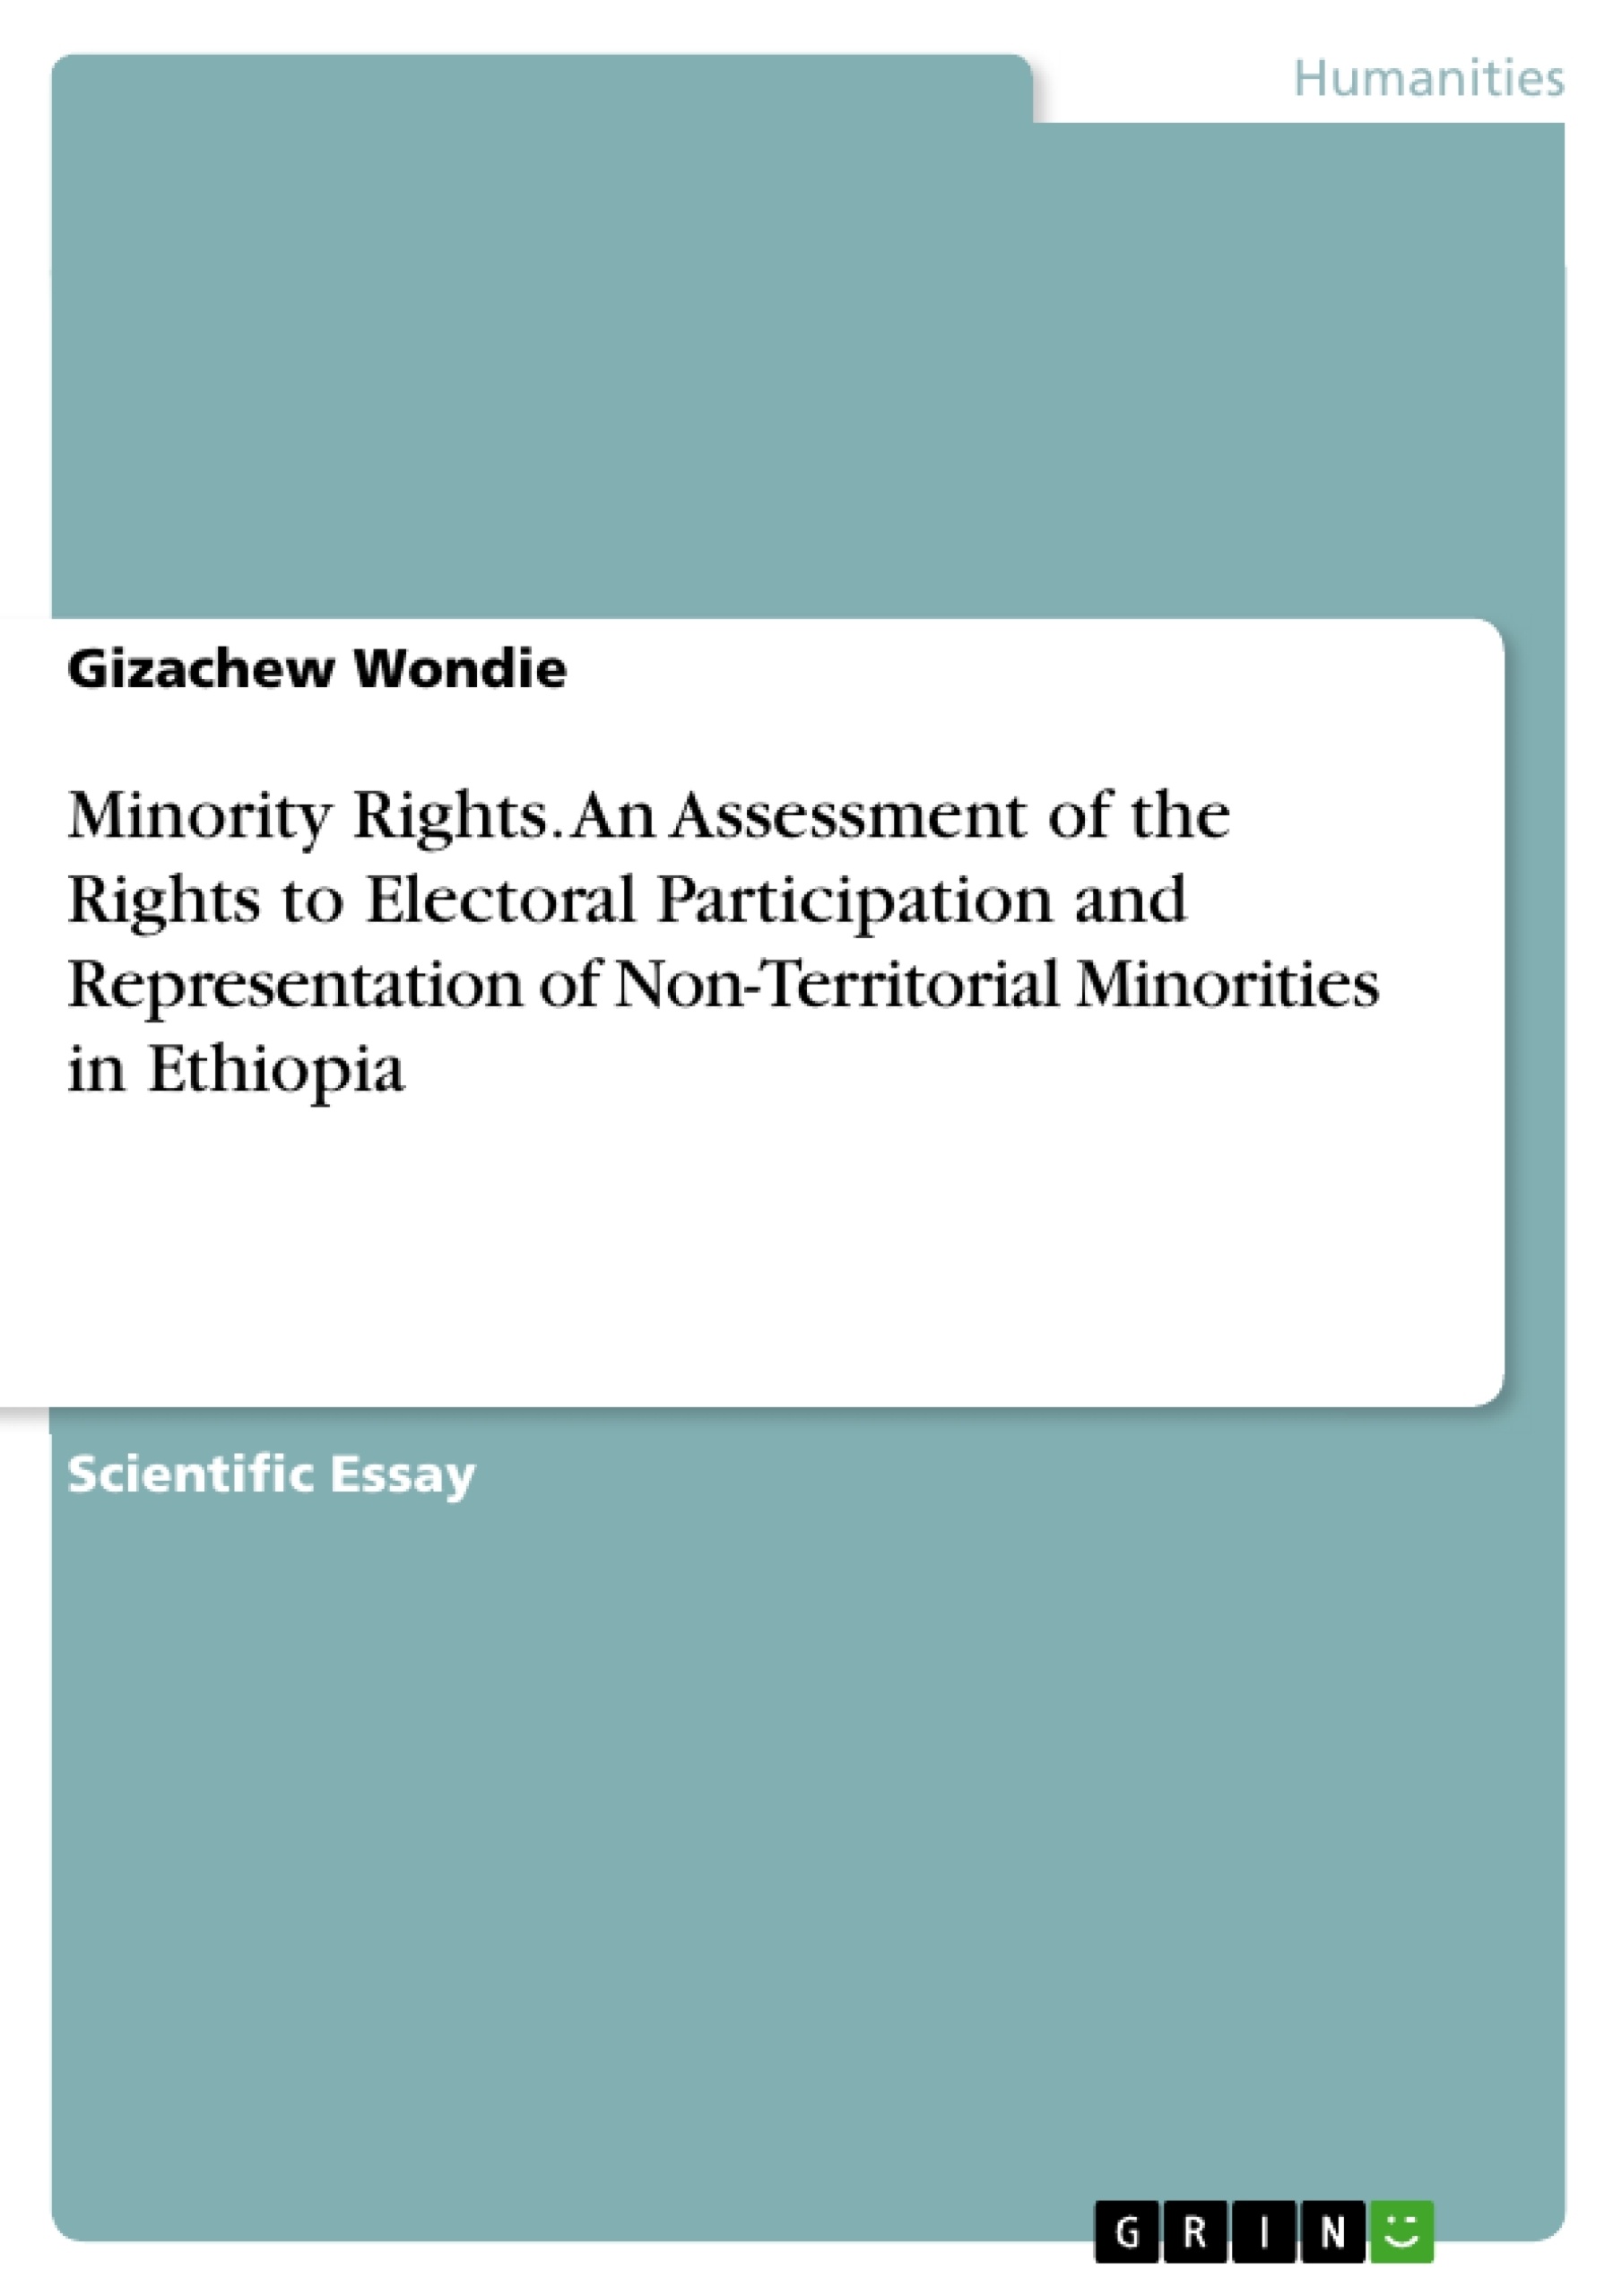 Titel: Minority Rights. An Assessment of the Rights to Electoral Participation and Representation of Non-Territorial Minorities in Ethiopia